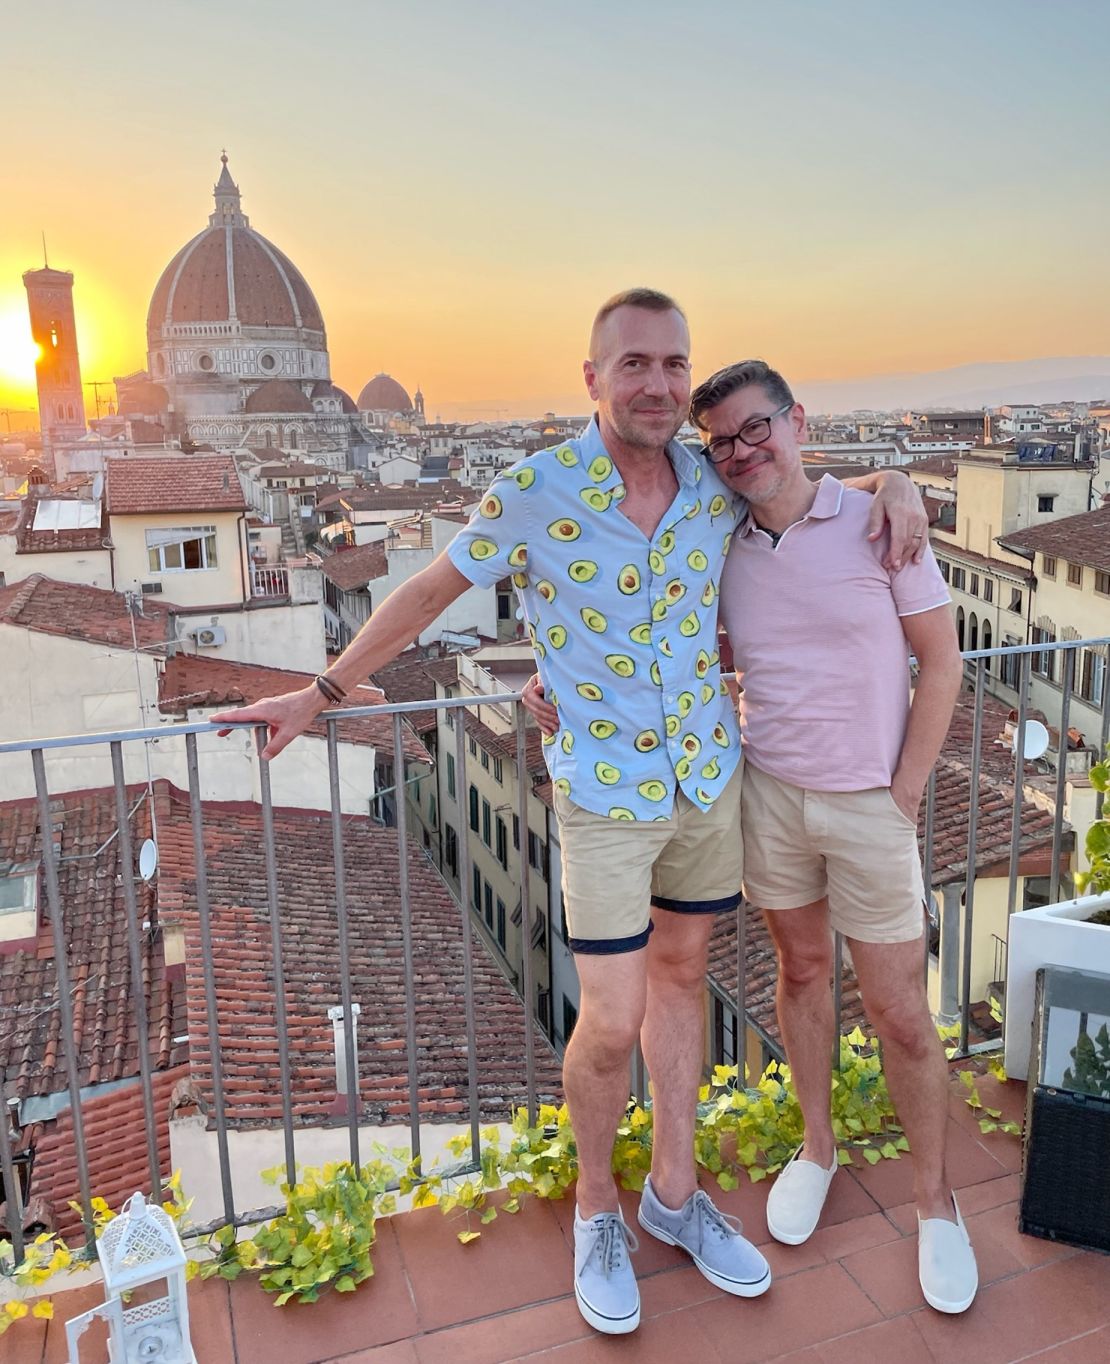 Guillermo and Larry love to travel together, here they are in Florence, Italy.